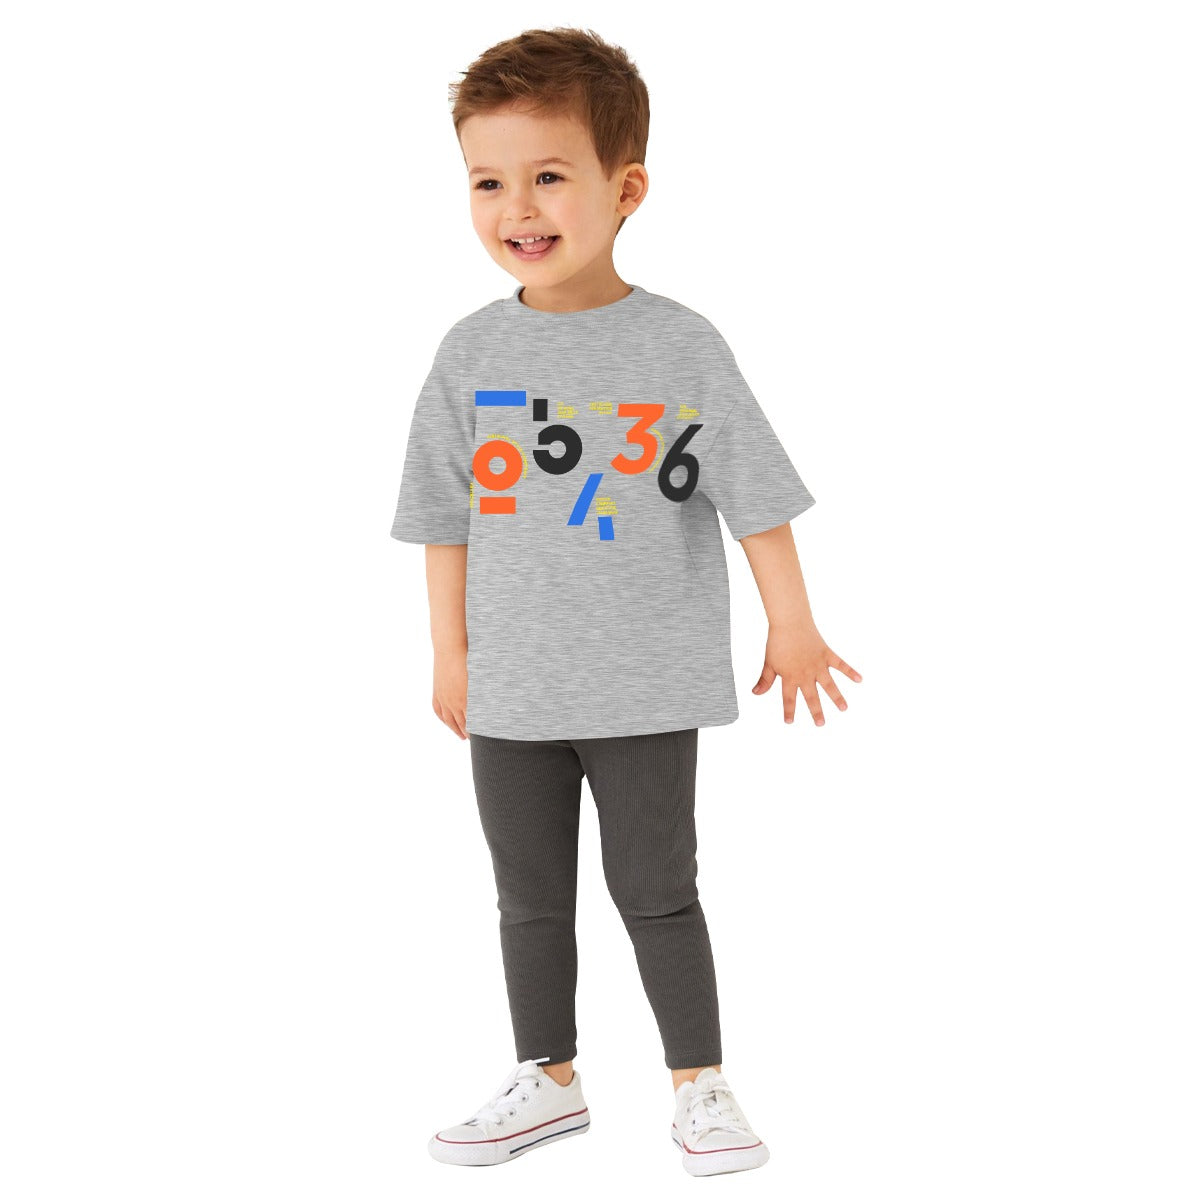 EXCLUSIVE GRAPHIC PRINTED BOY'S TEE SHIRT - GRAY